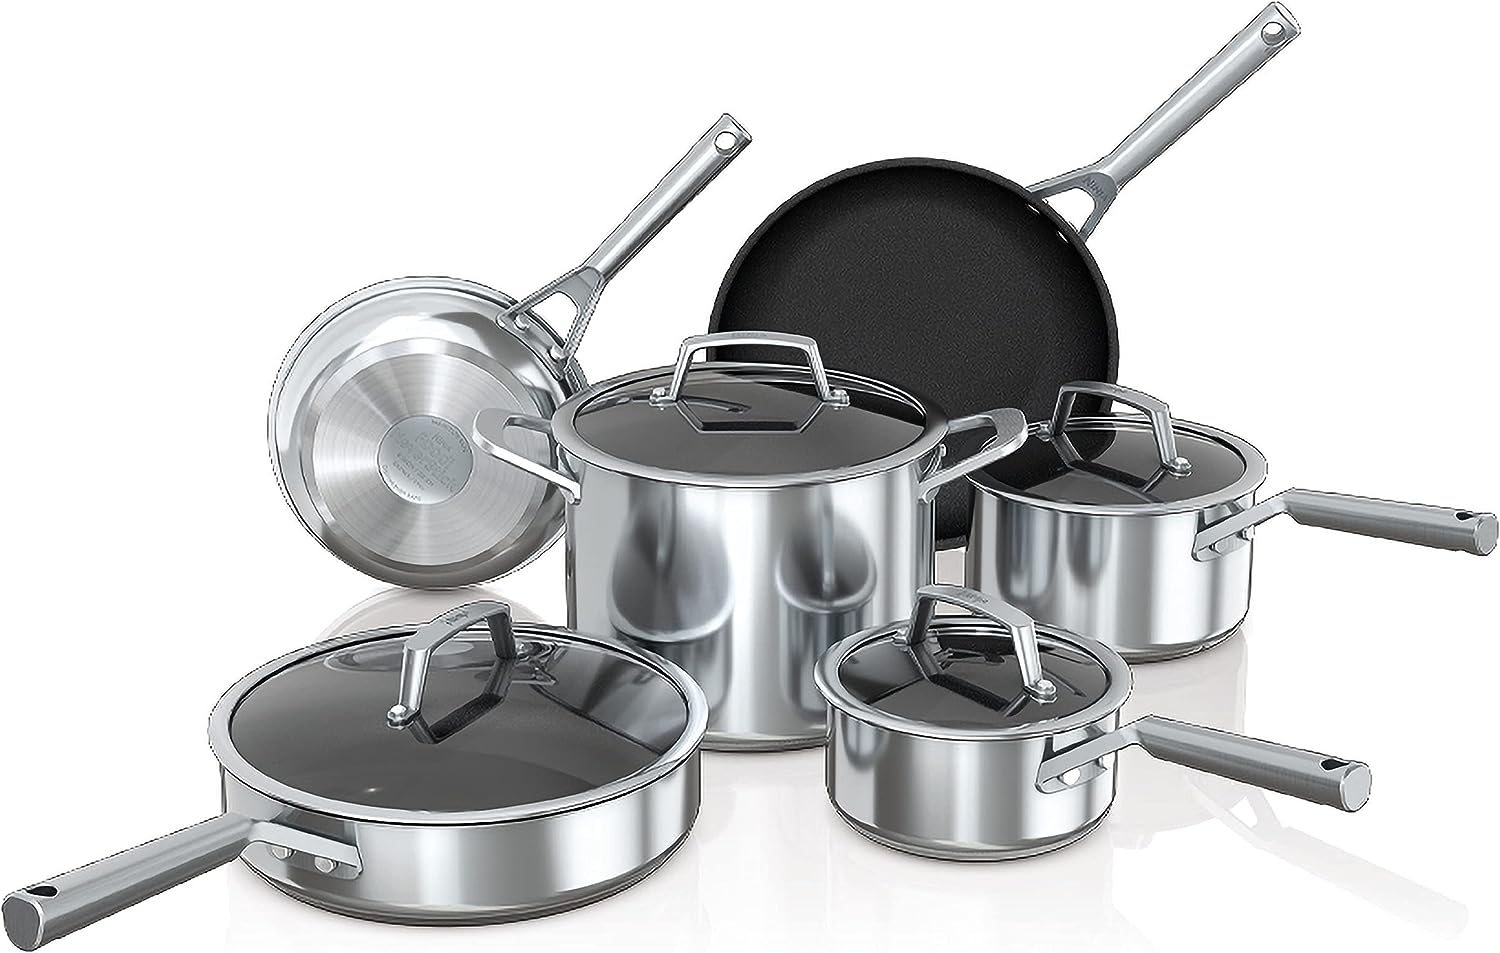 Ninja C69500 Foodi NeverStick Stainless 10-Piece Cookware Set with Glass Lids, Polished Stainless-Steel Exterior, Nonstick, Durable  Oven Safe to 500°F, Silver